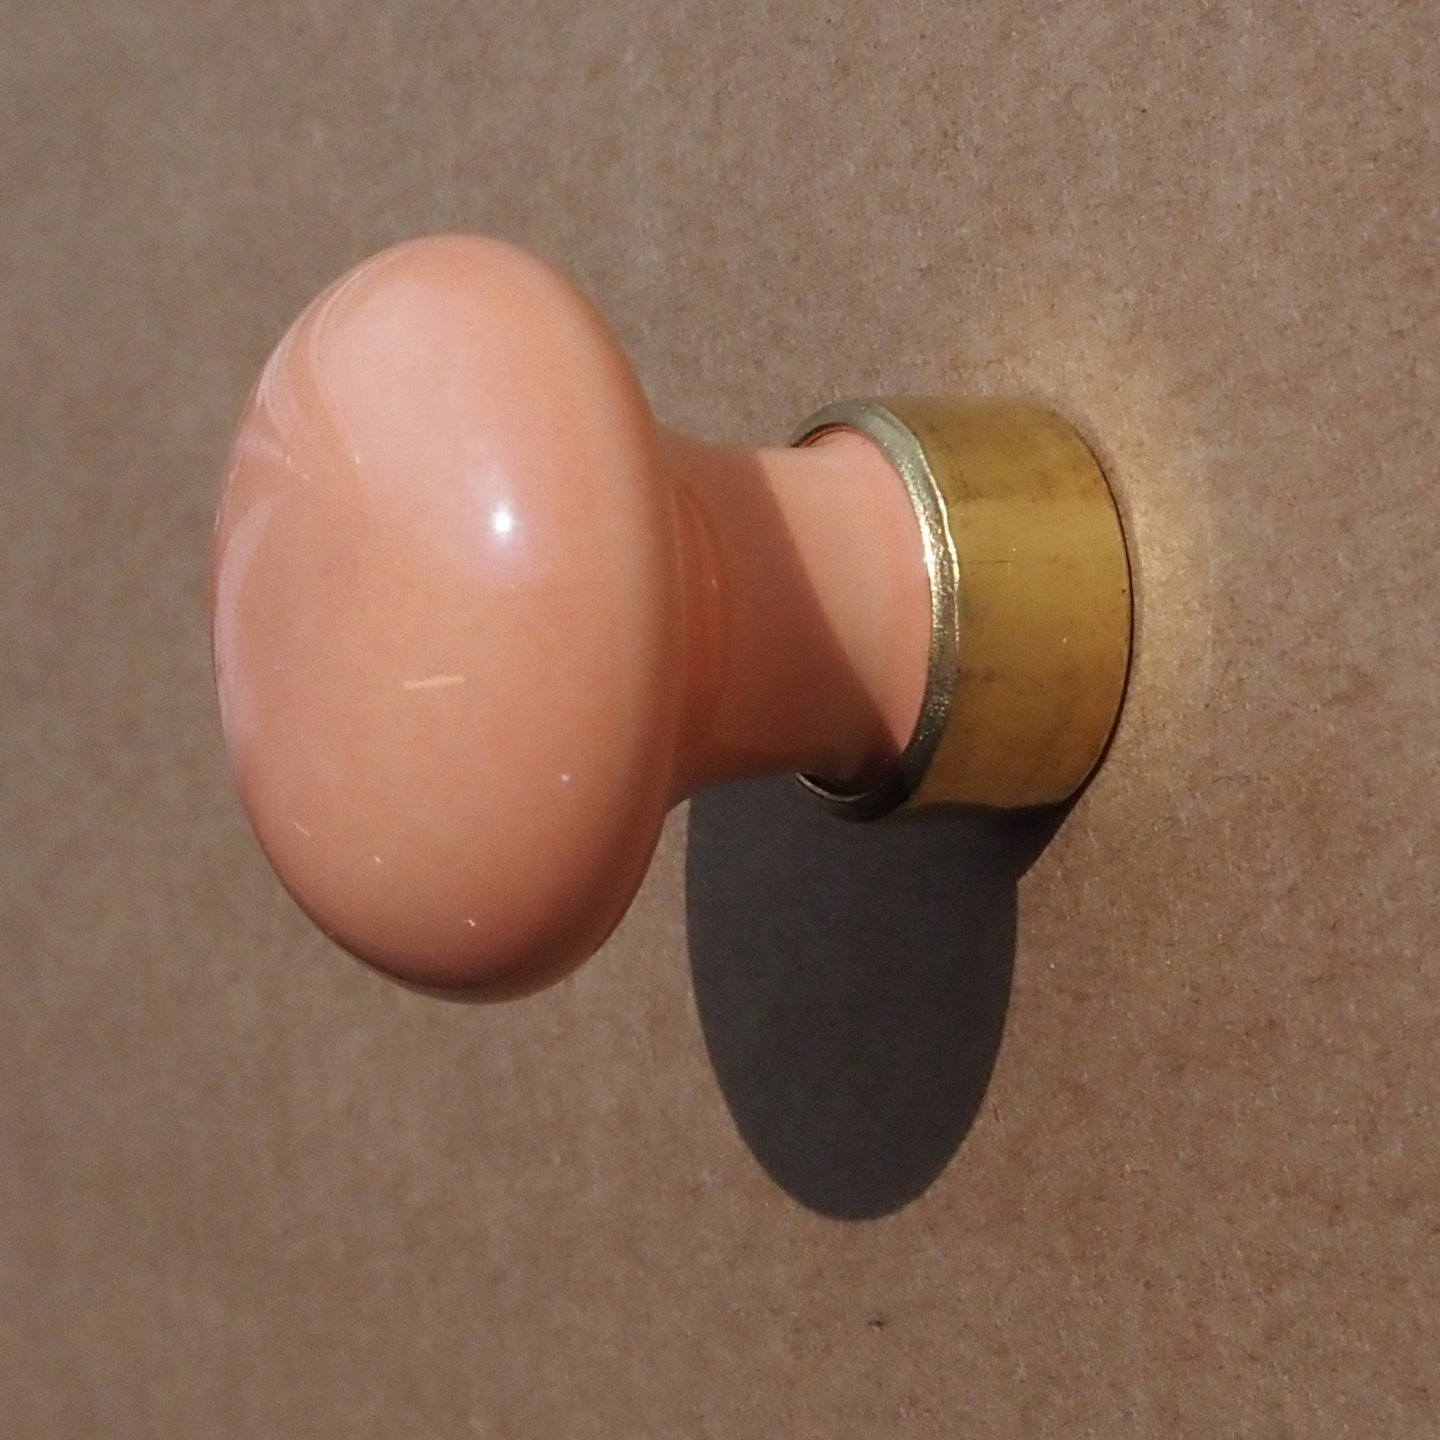 Cabinet knob in salmon pink porcelain and brass